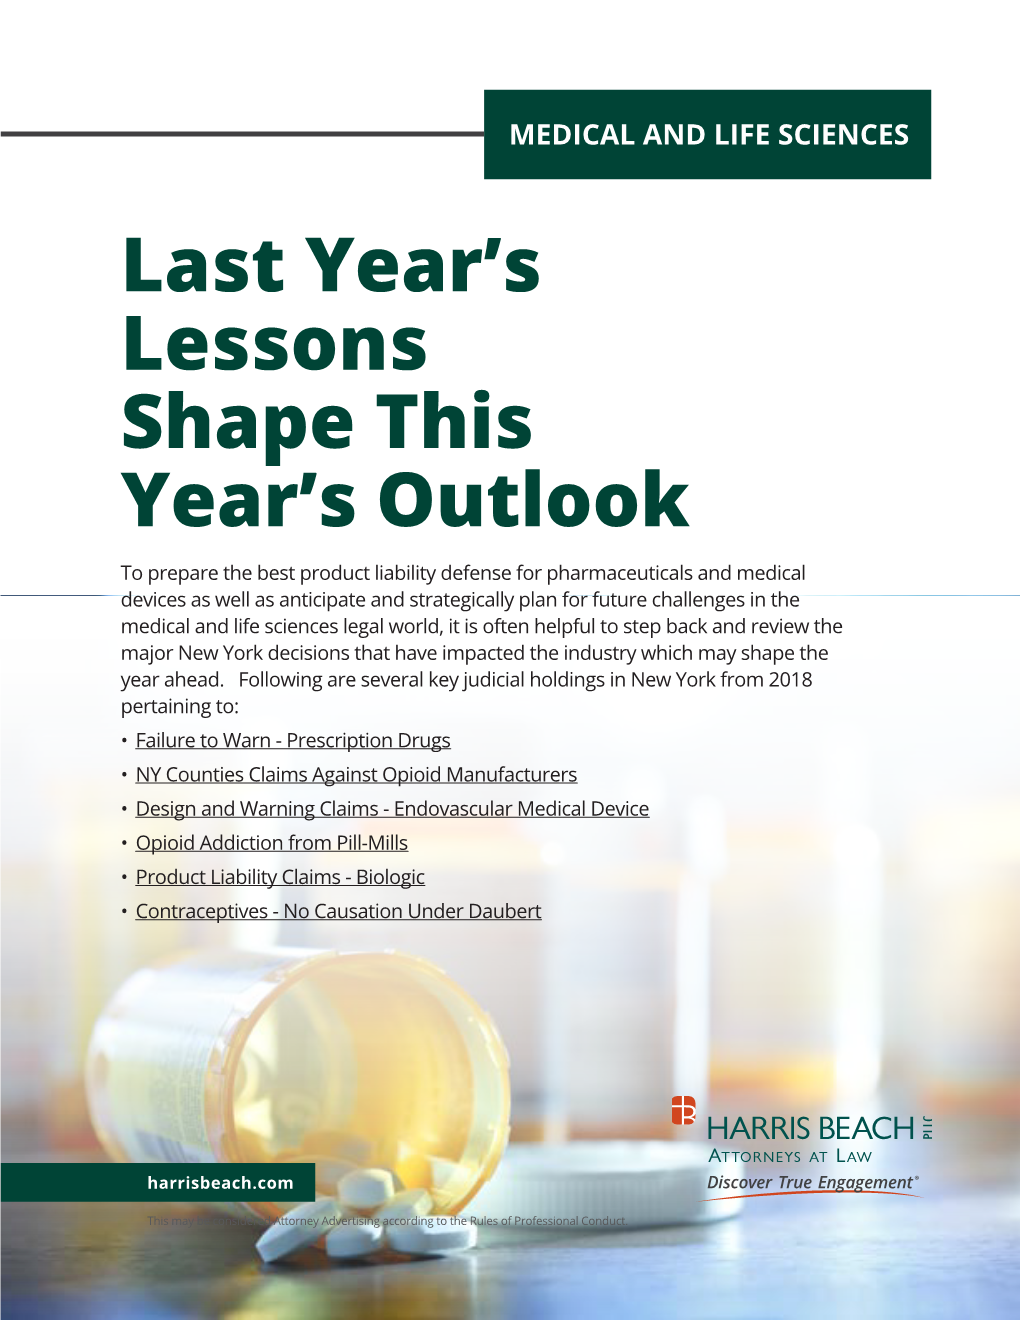 Last Year's Lessons Shape This Year's Outlook